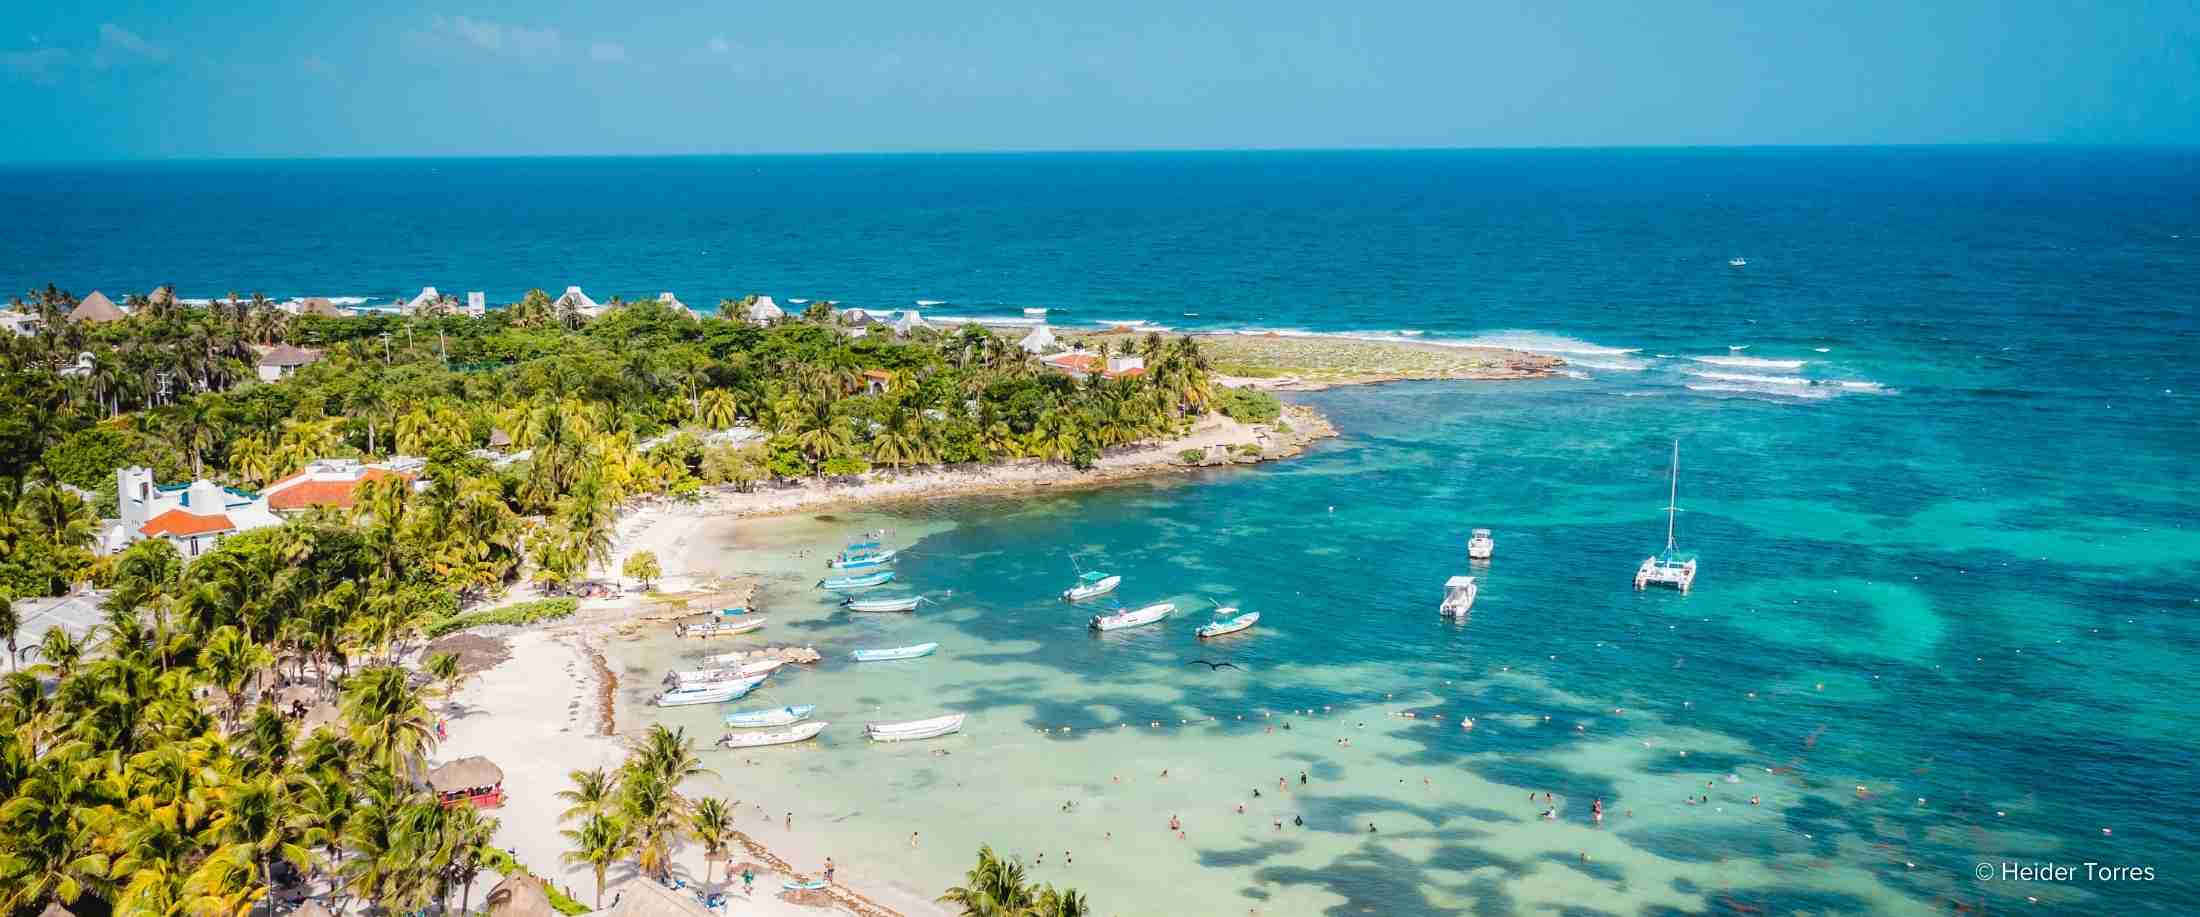 The beach in Akumal Bay in Quintana Roo, a destination that has implemented sustainable development guidelines